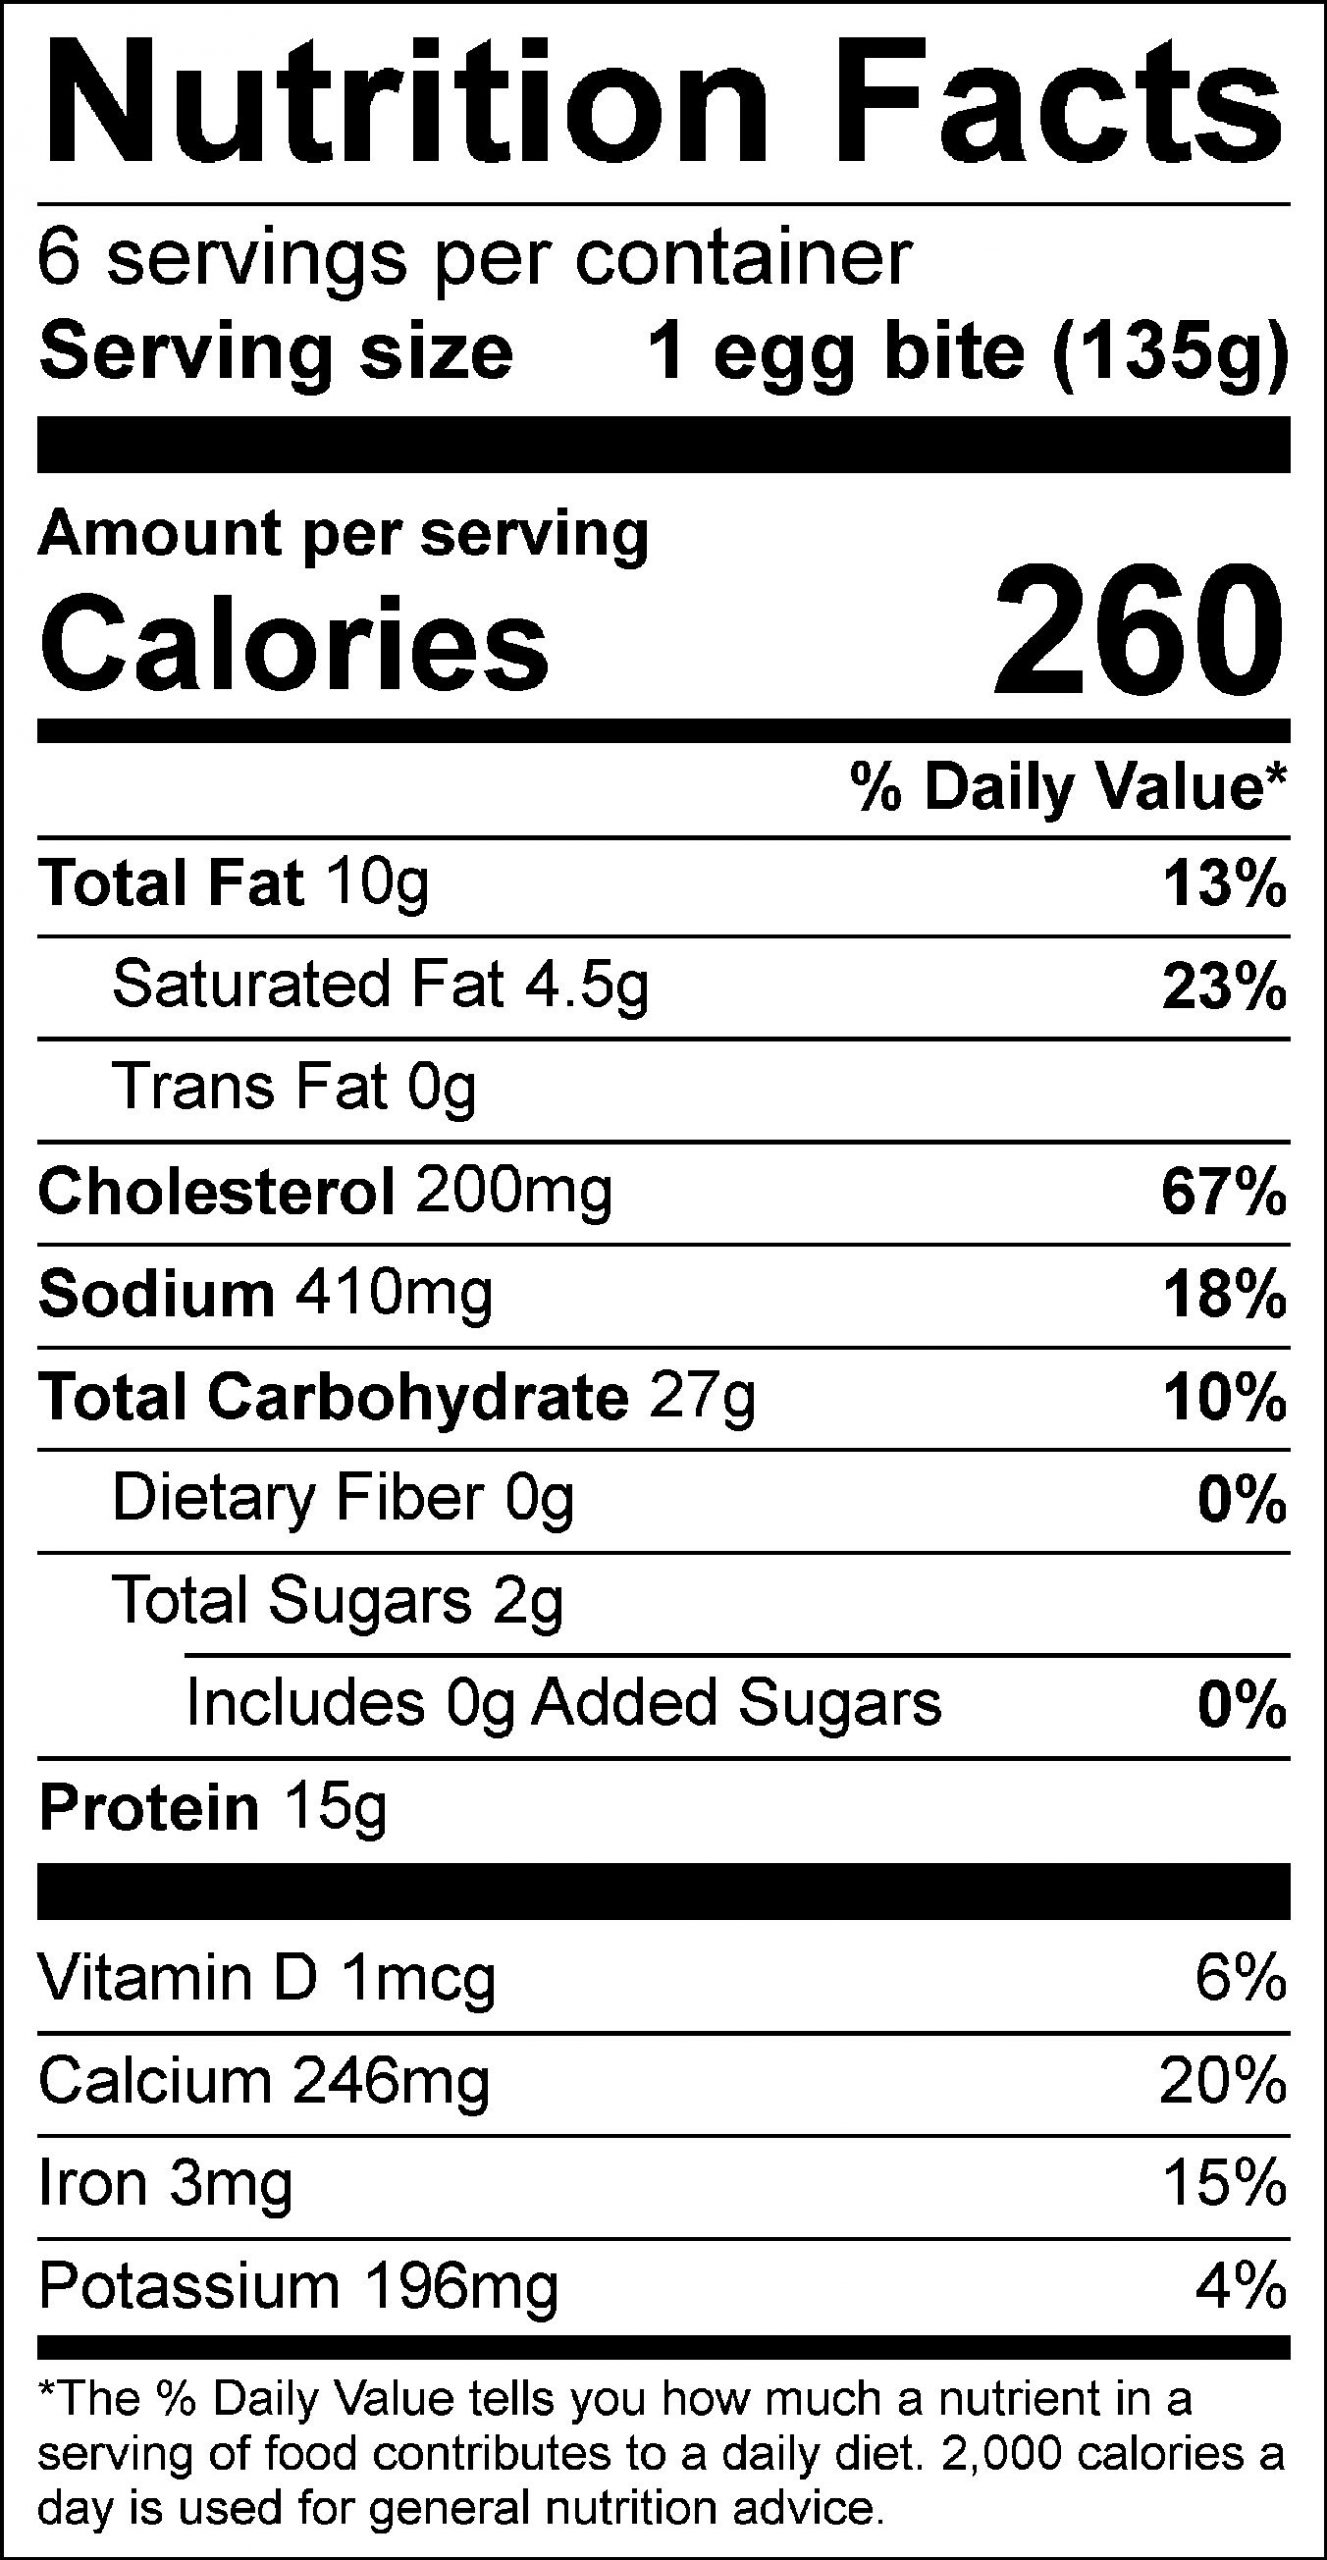 Egg Bites Food Nutrition Facts Label: Click on this image for complete nutrition information